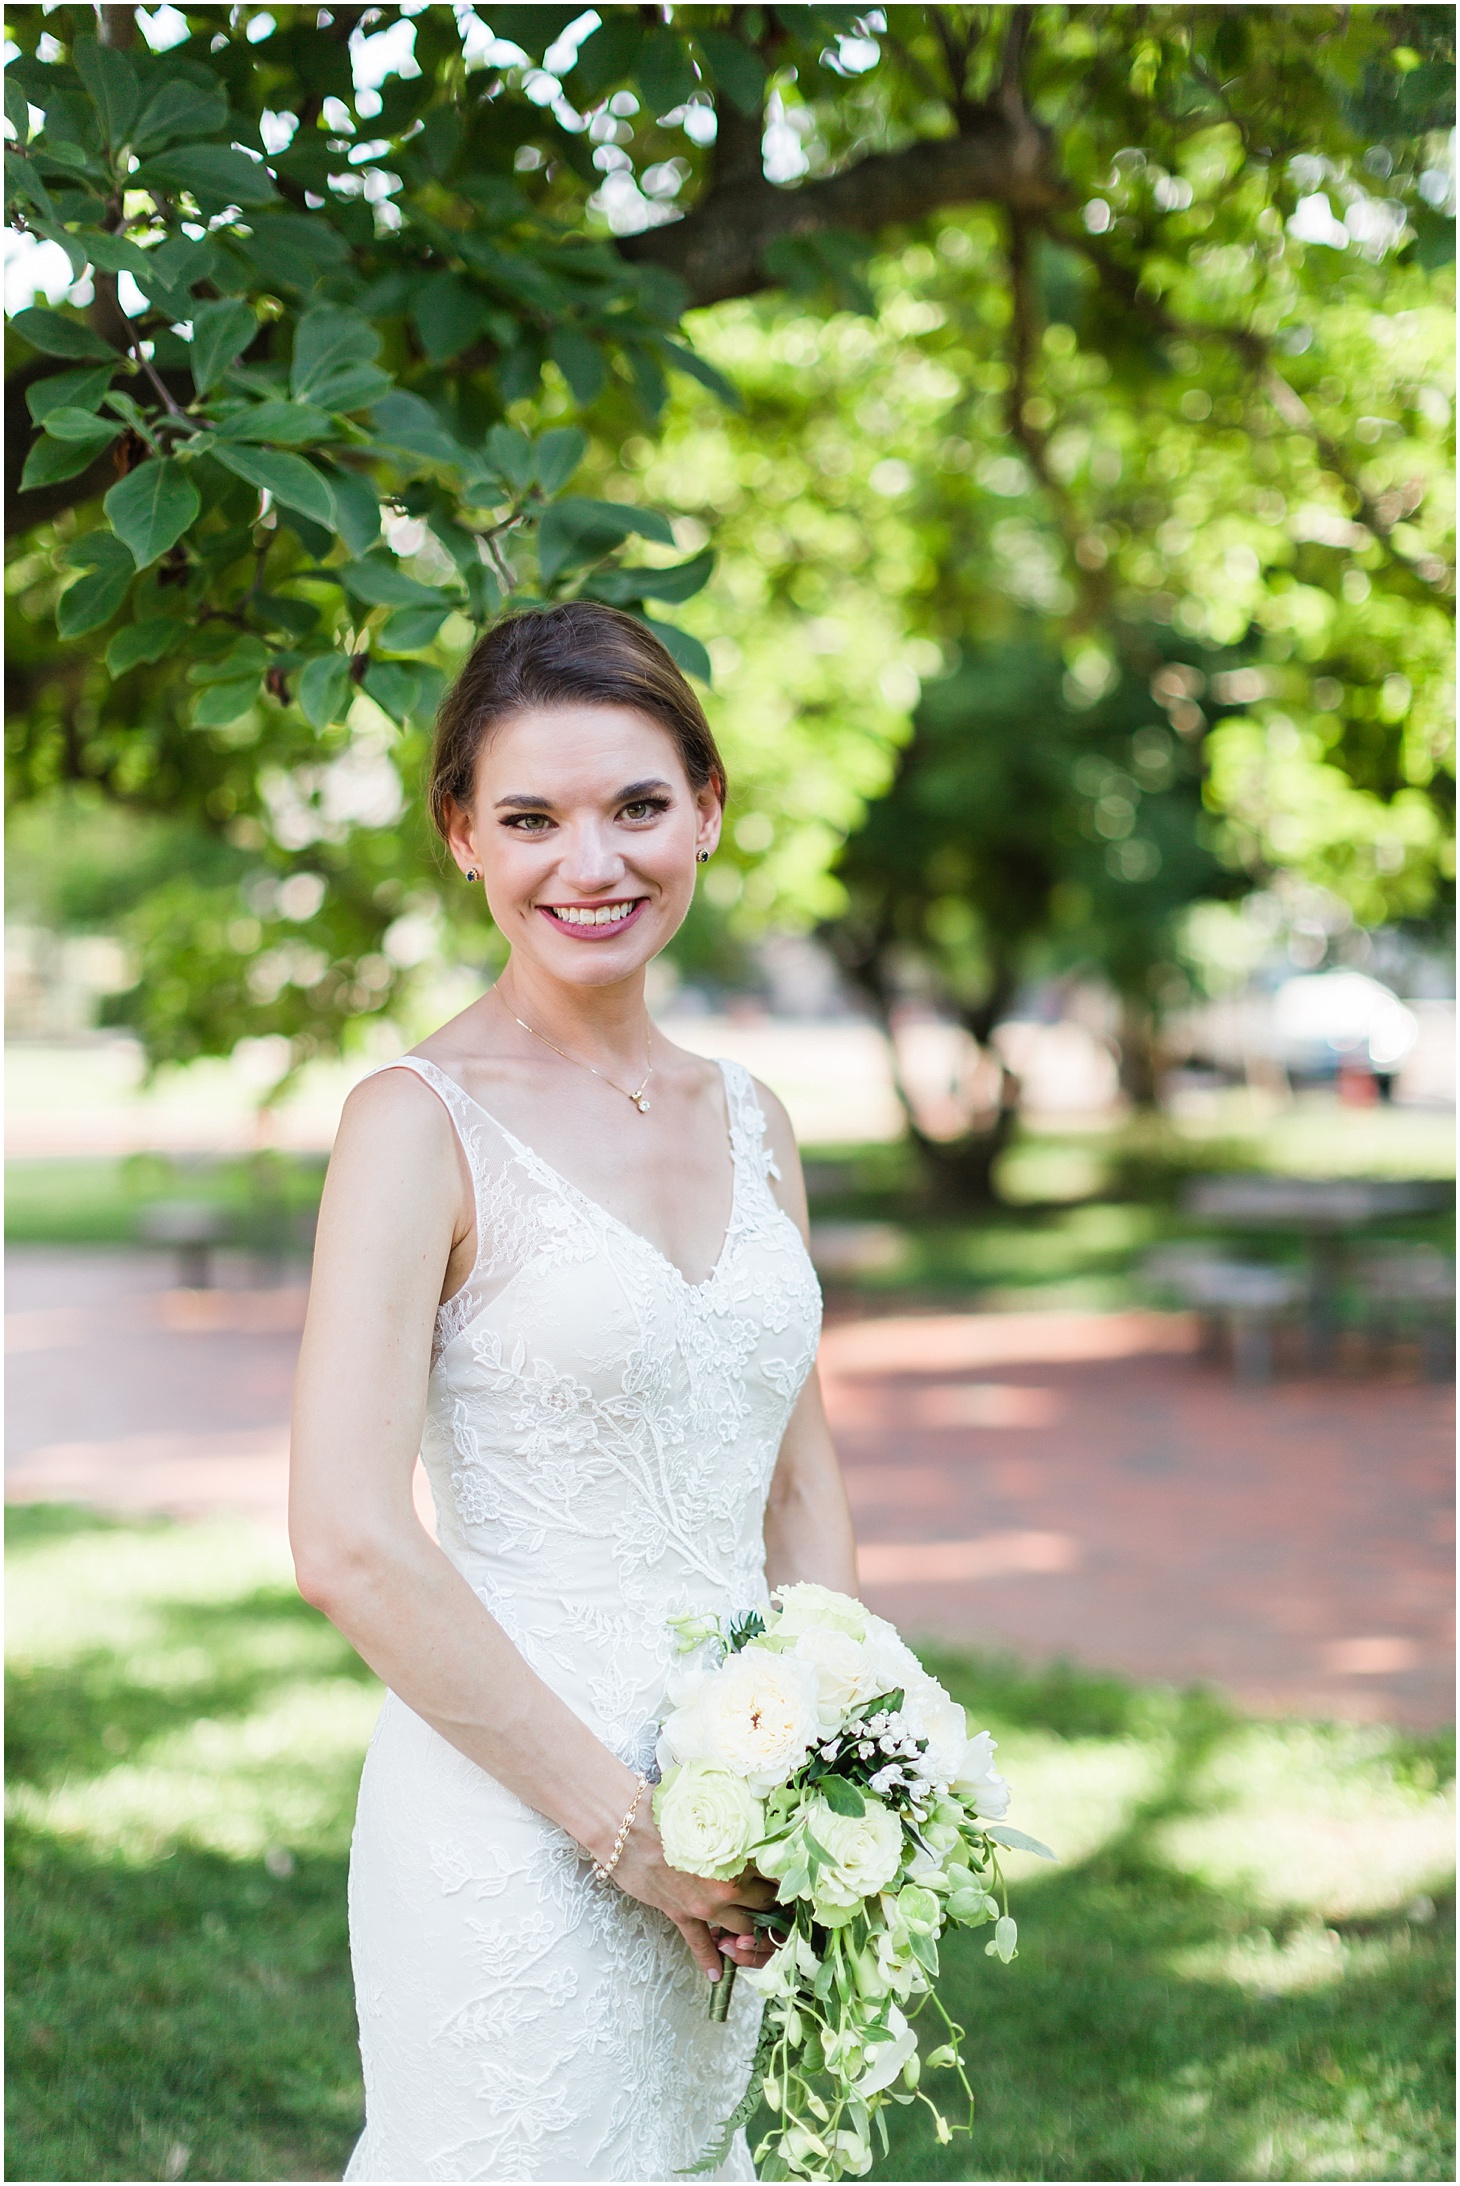 Wedding Portraits in Lafayette Square, Black Tie Hay-Adams Wedding with Summer Florals, Ceremony at Capitol Hill Baptist Church, Sarah Bradshaw Photography, DC Wedding Photographer